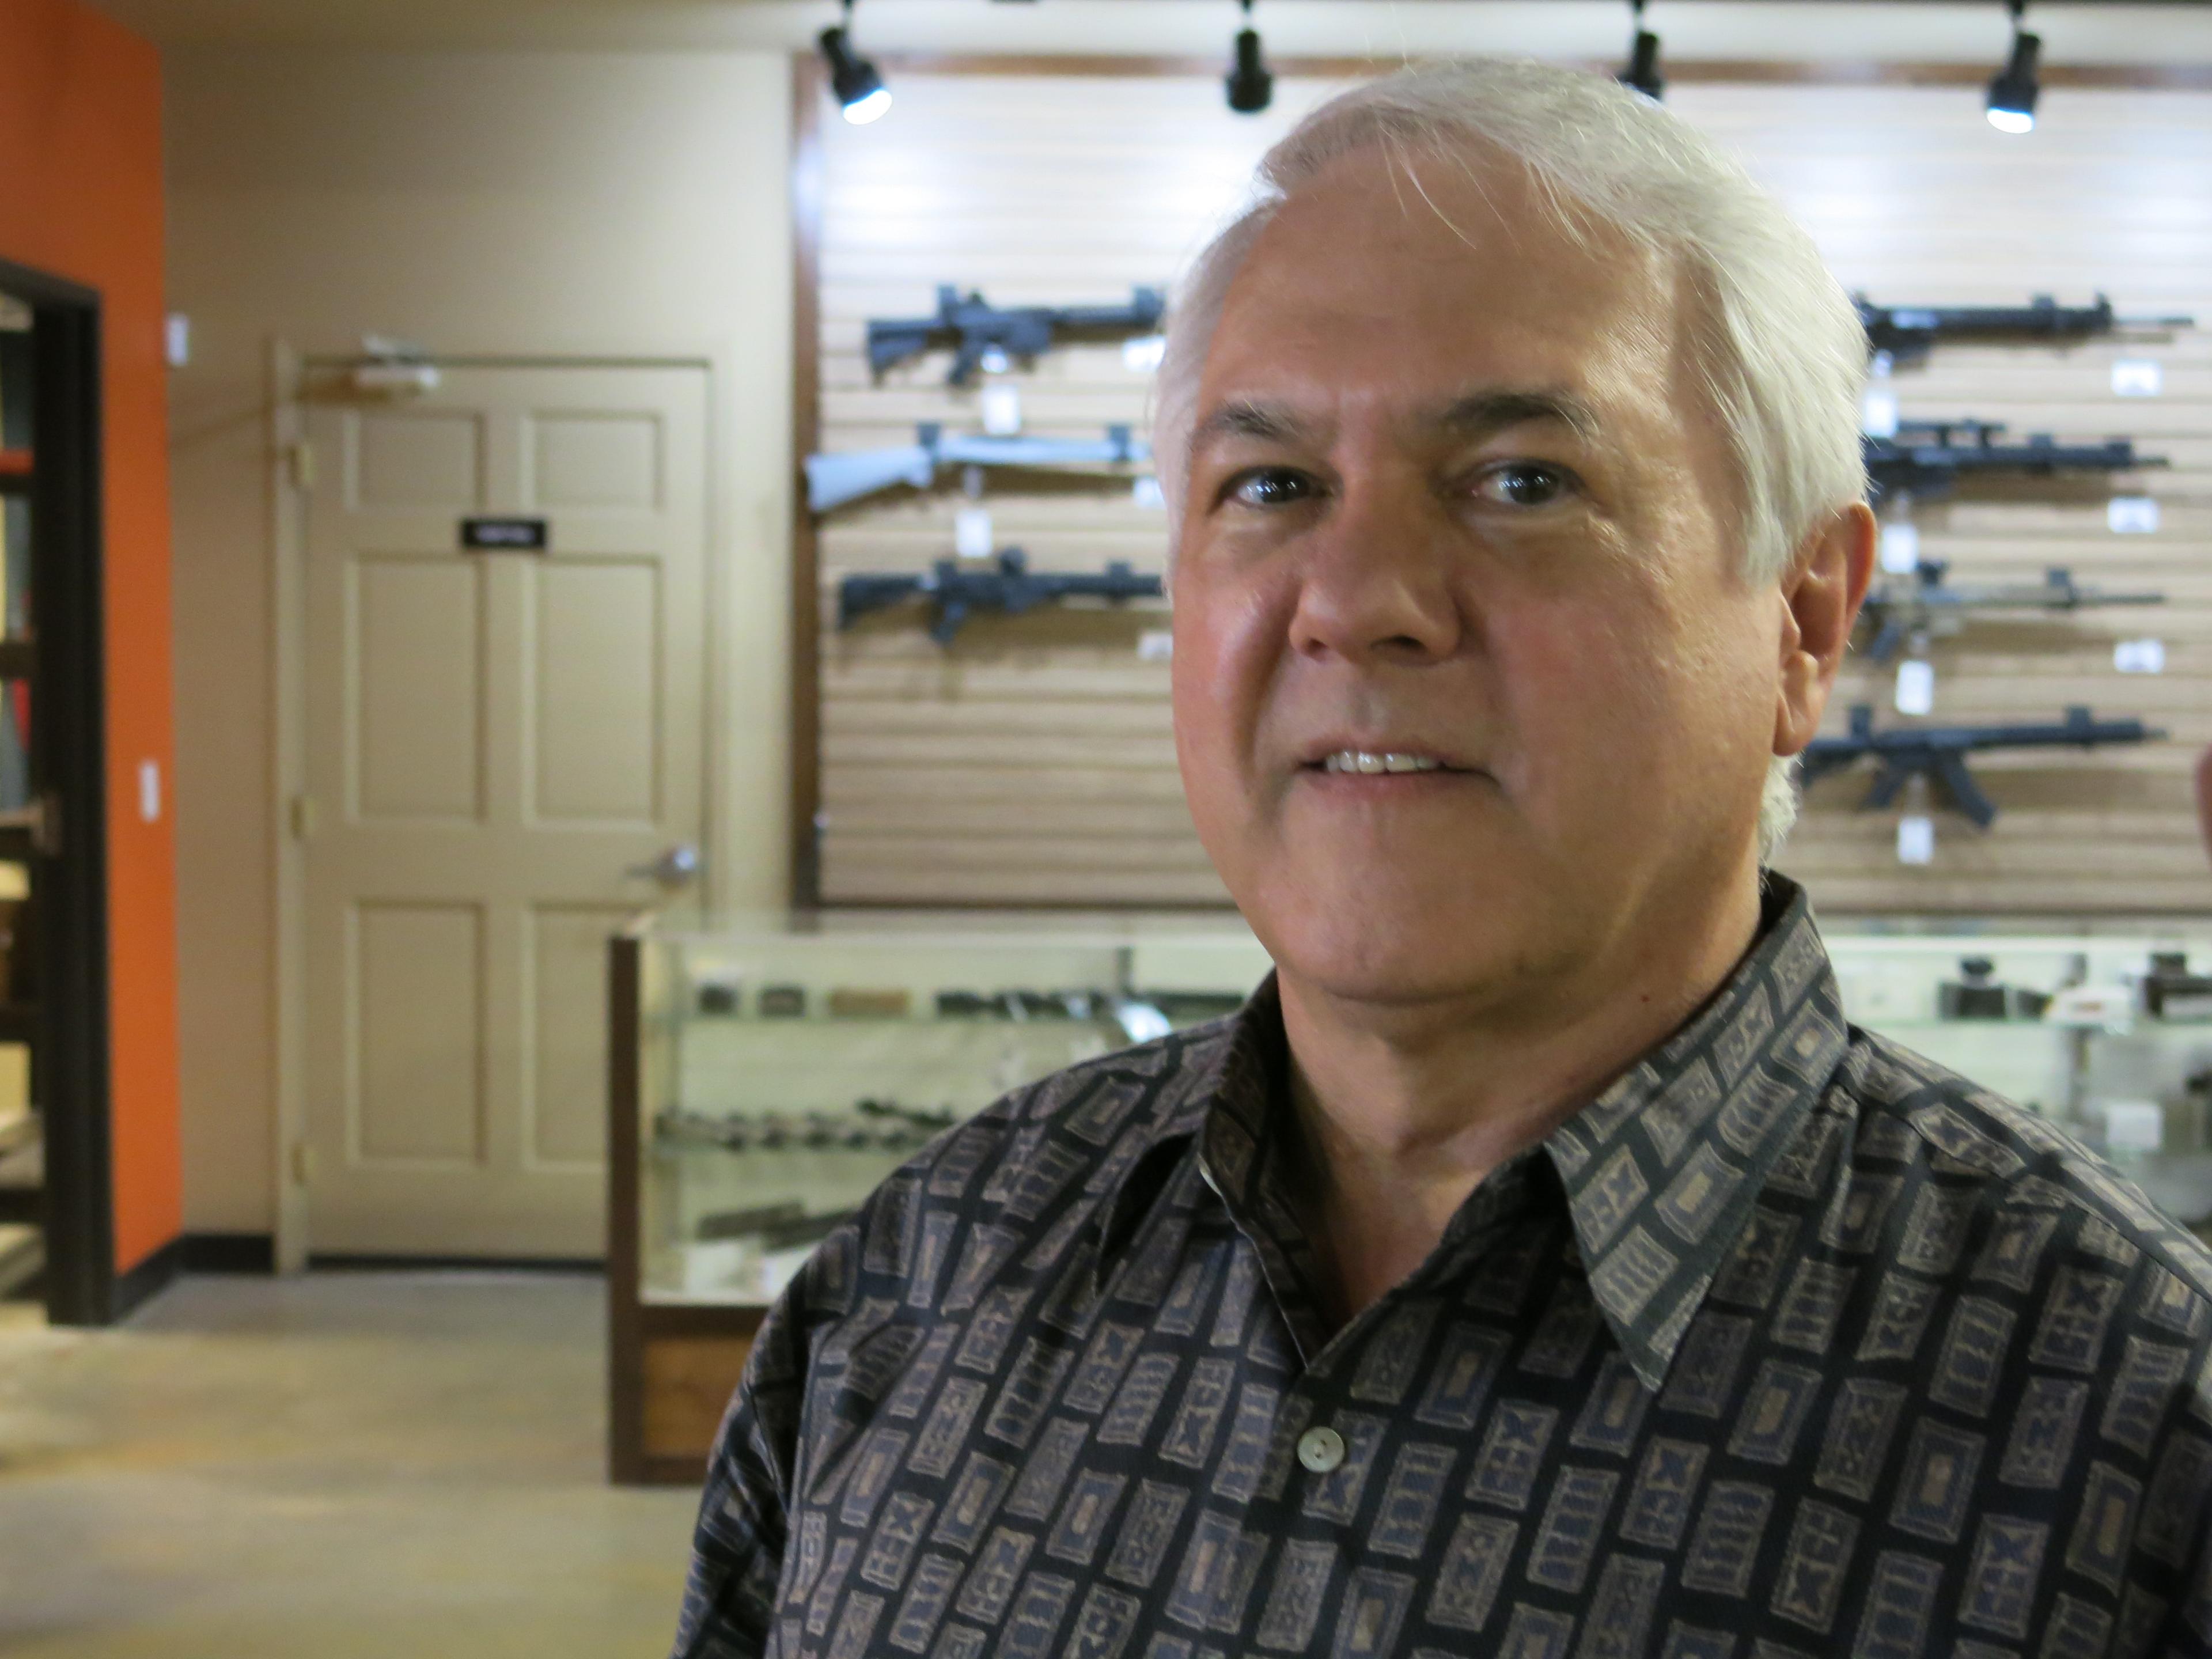 Dr. Michael Victoroff is a gun owner and public health advocate